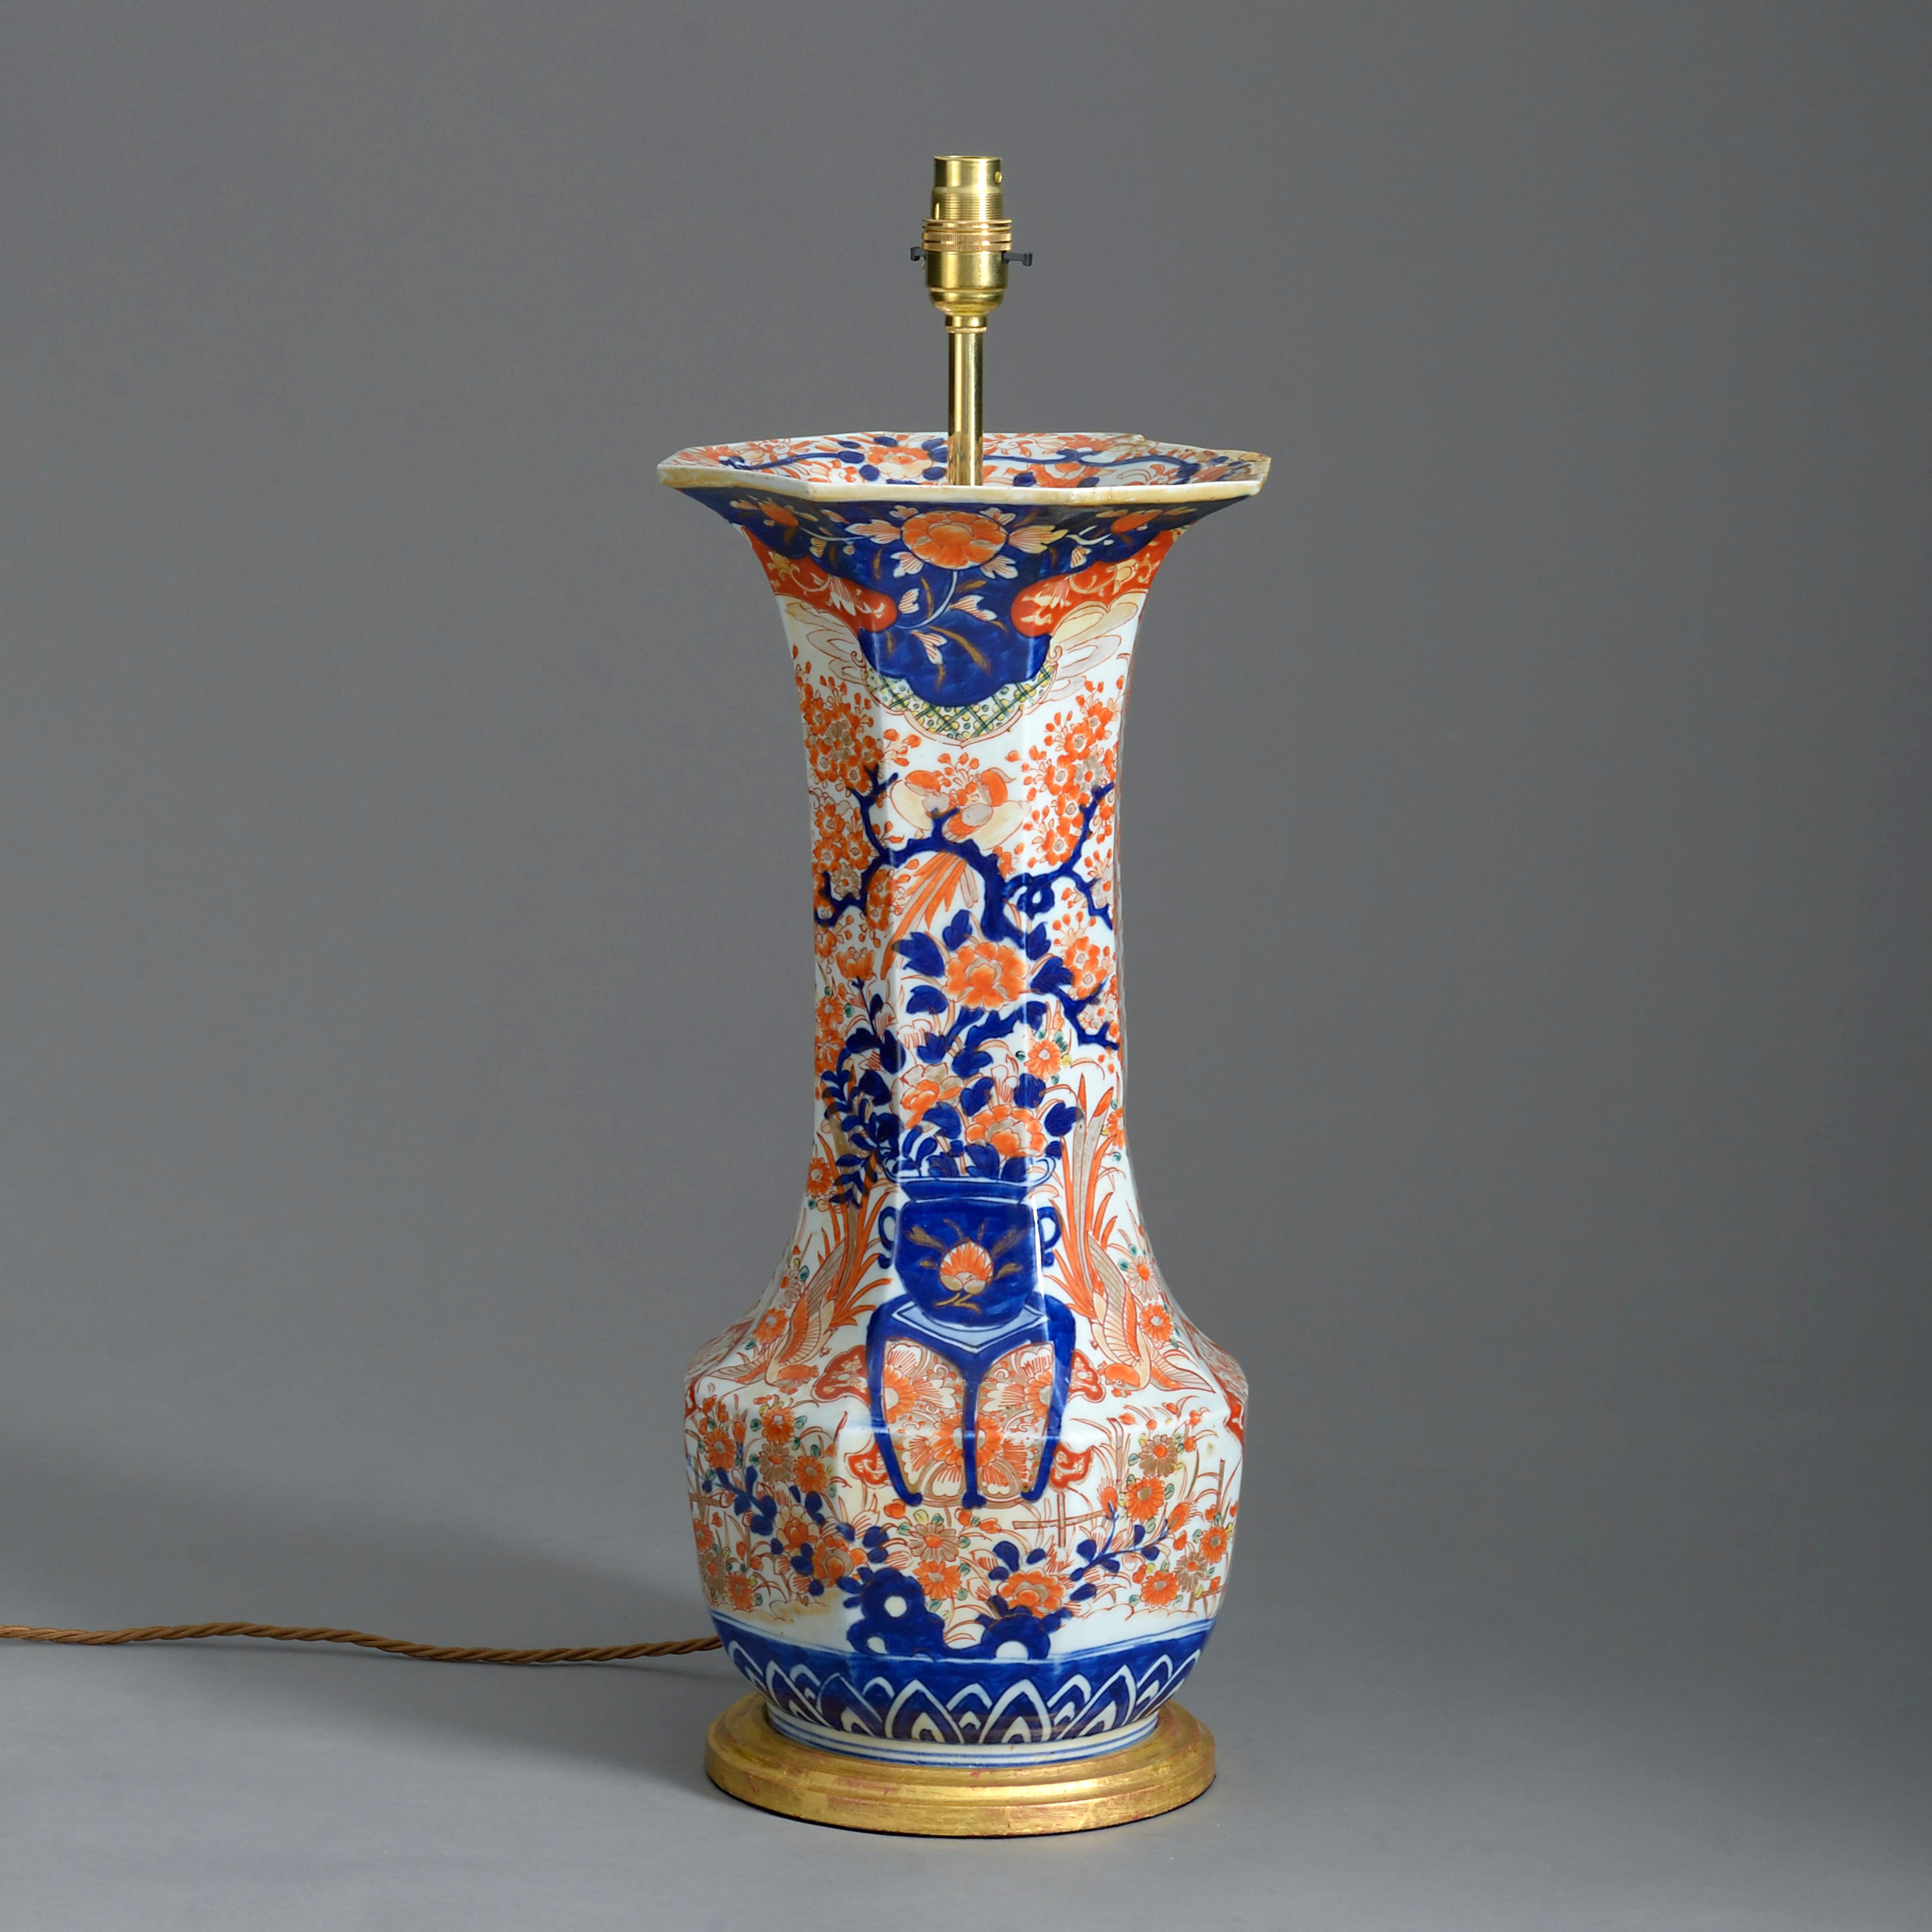 A late 19th century Imari porcelain trumpet vase, decorated throughout with red, blue, green, and gold glazes upon a white ground in the traditional manner. Now mounted as a table lamp.

Height dimensions refer to height of vase only.

Wired and